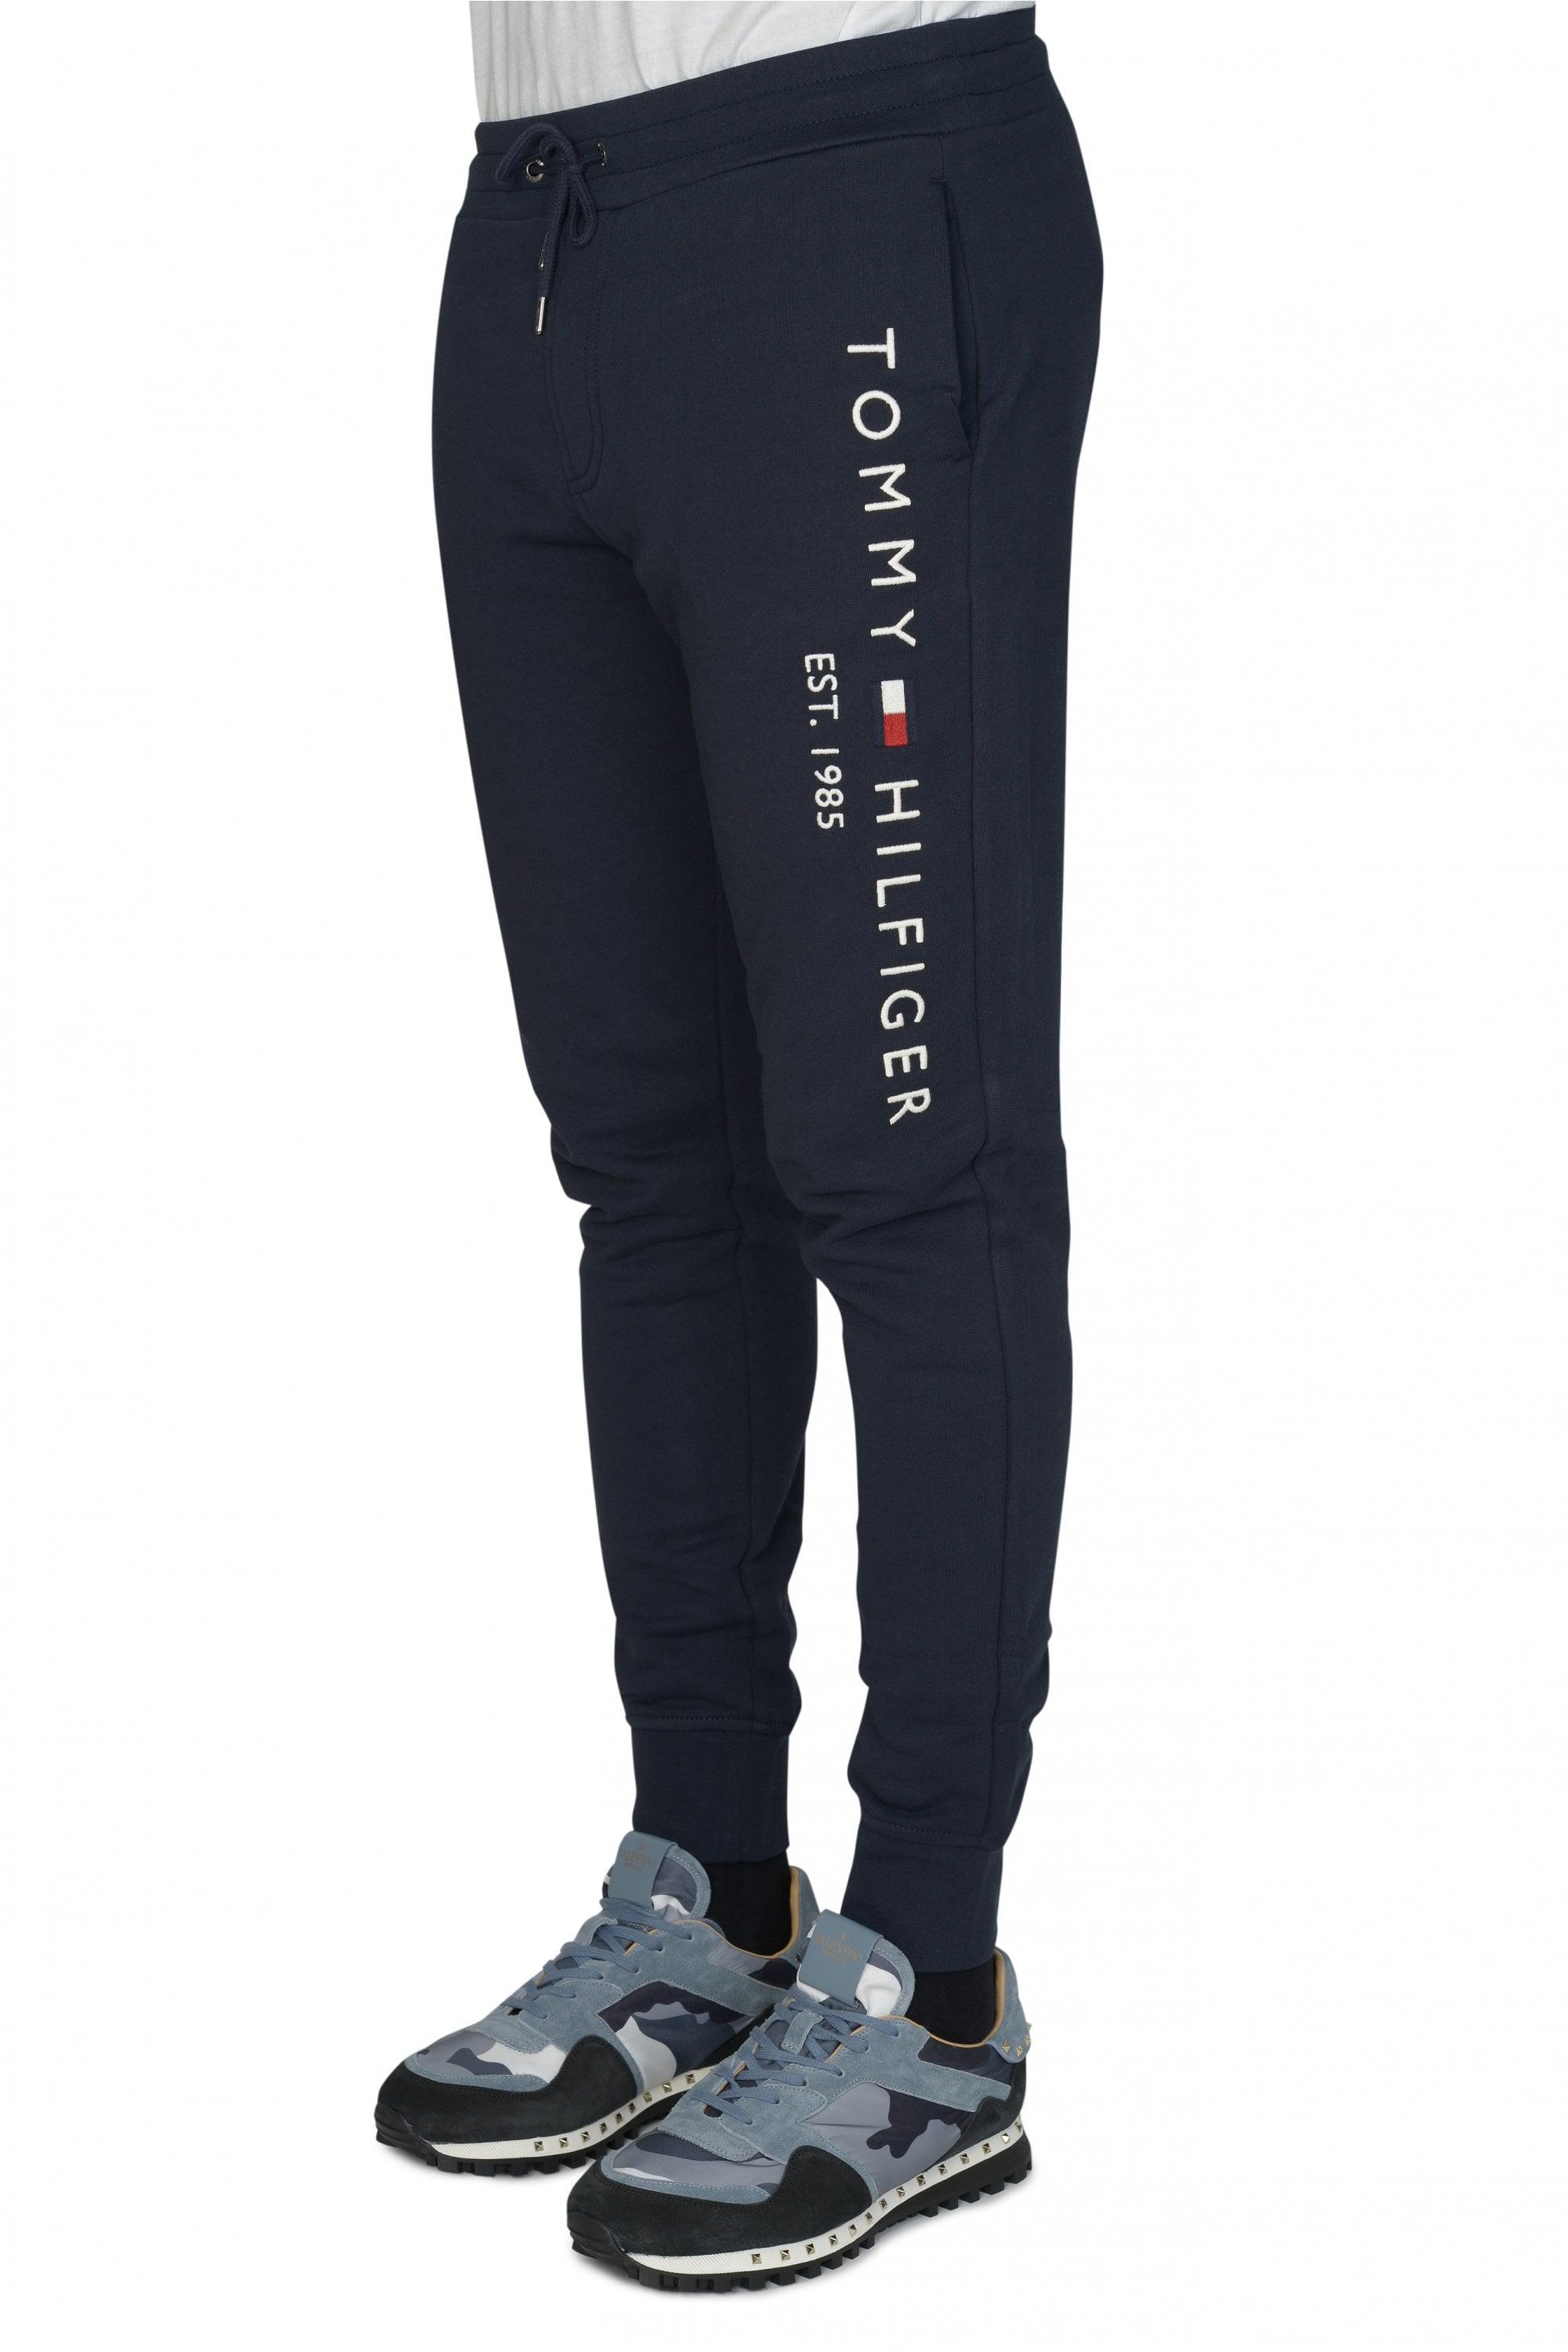 Tommy Hilfiger Cotton Logo Joggers in Navy (Blue) for Men - Lyst